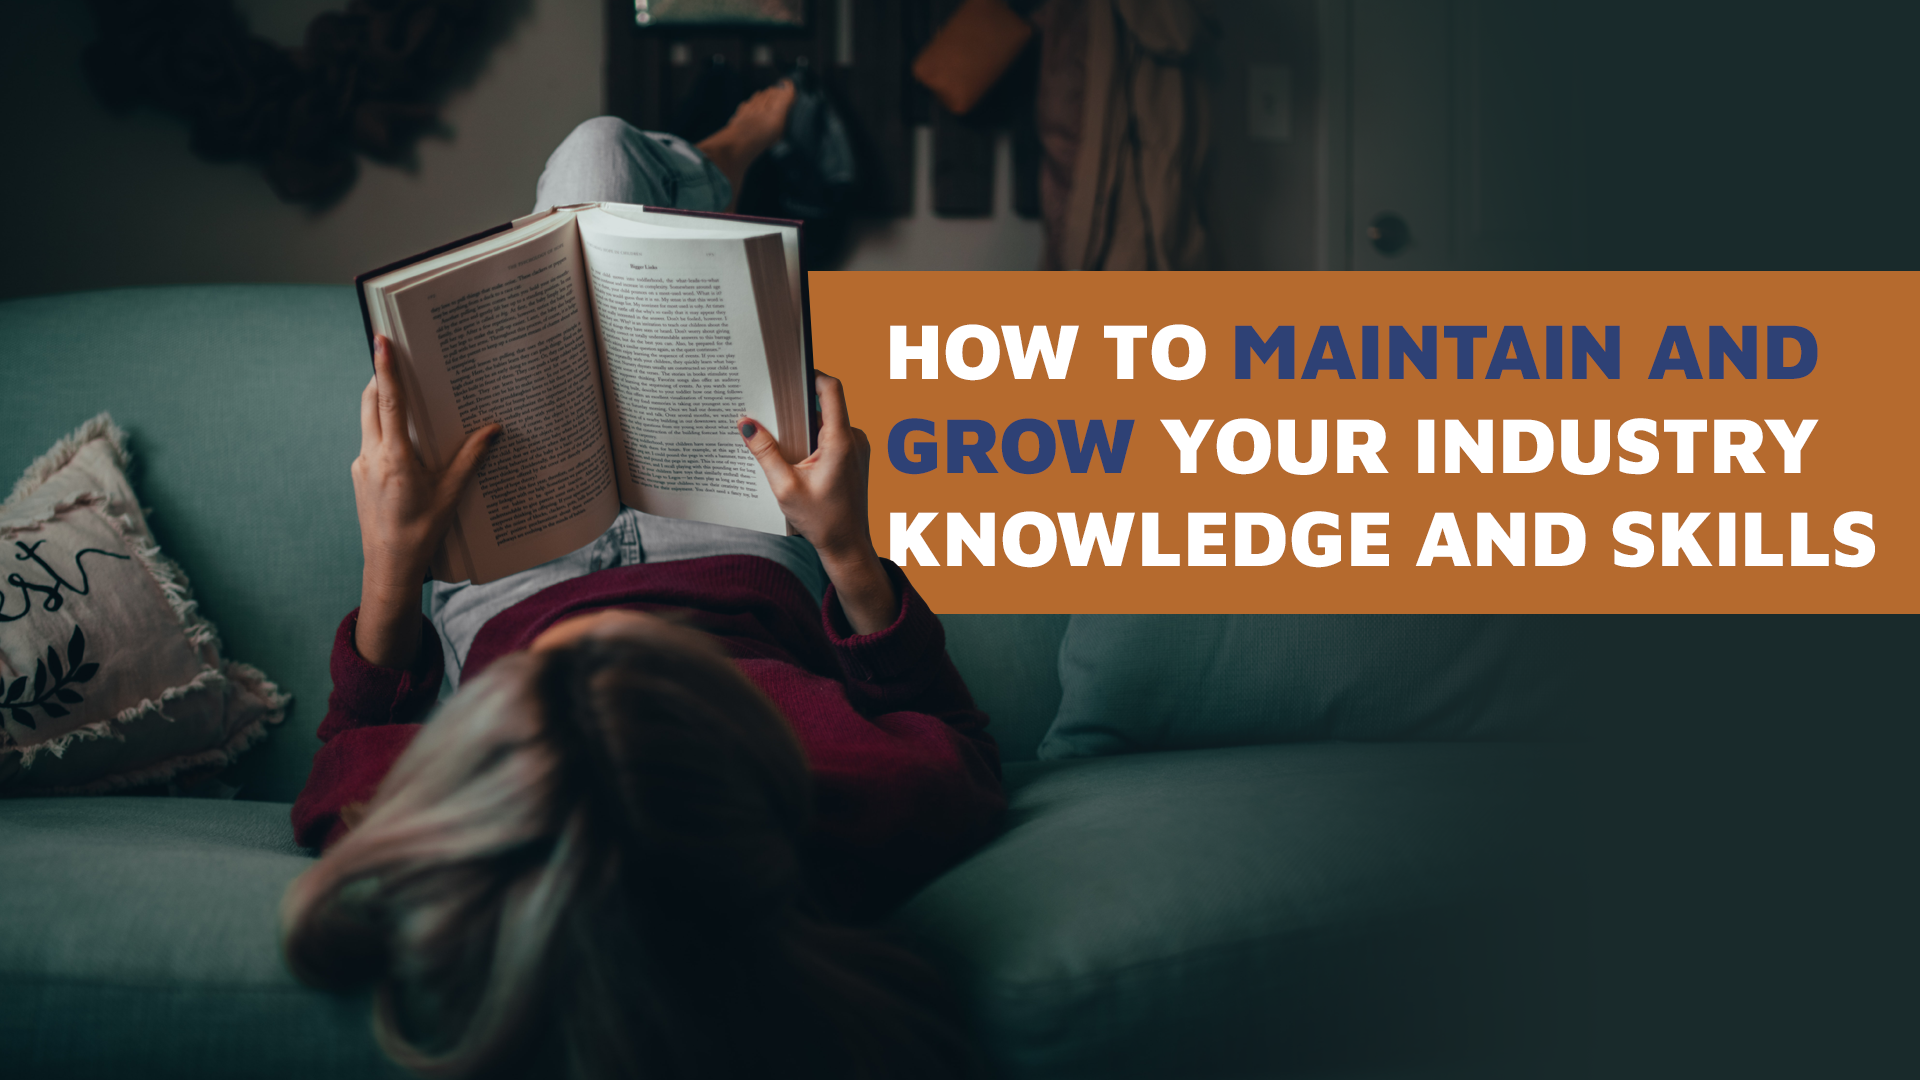 How to Maintain & Grow Your Industry Knowledge and Skills